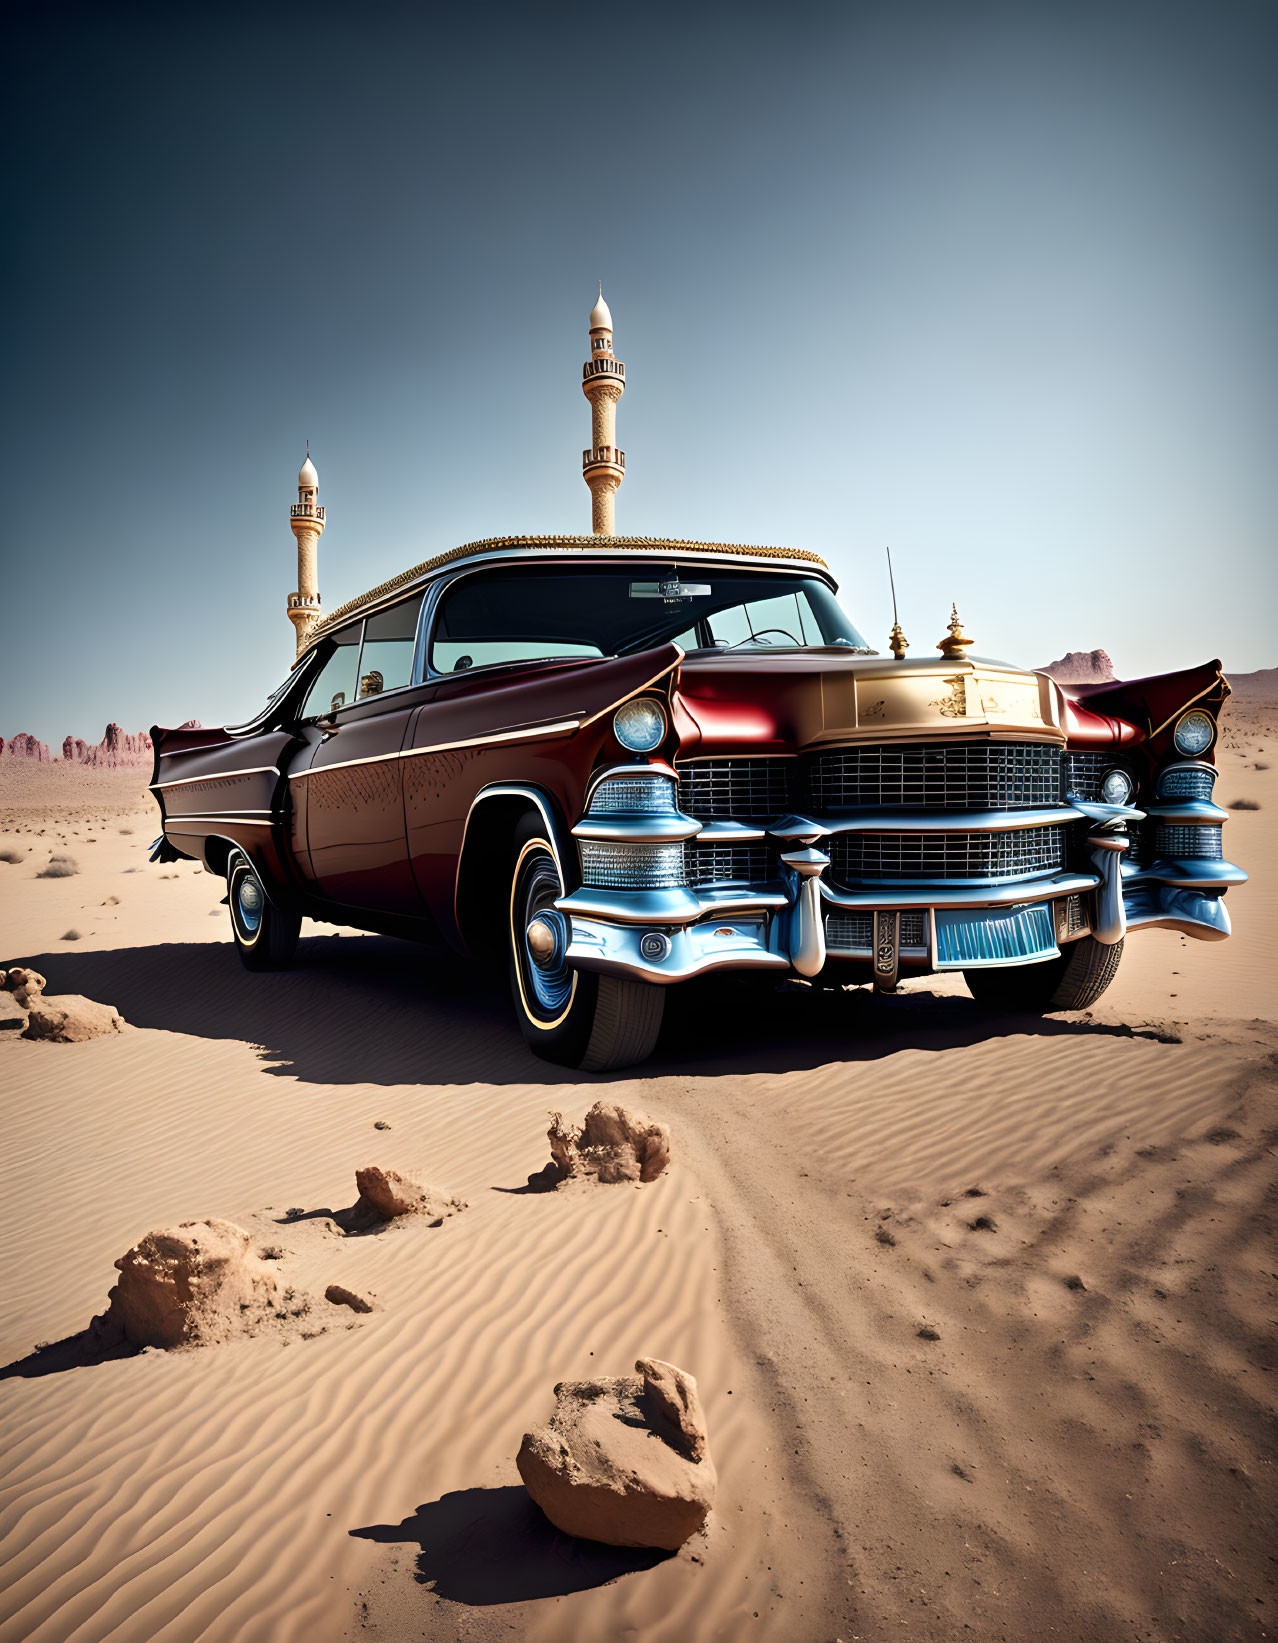 Vintage red and black car with tailfins in desert landscape with mosque and minarets.